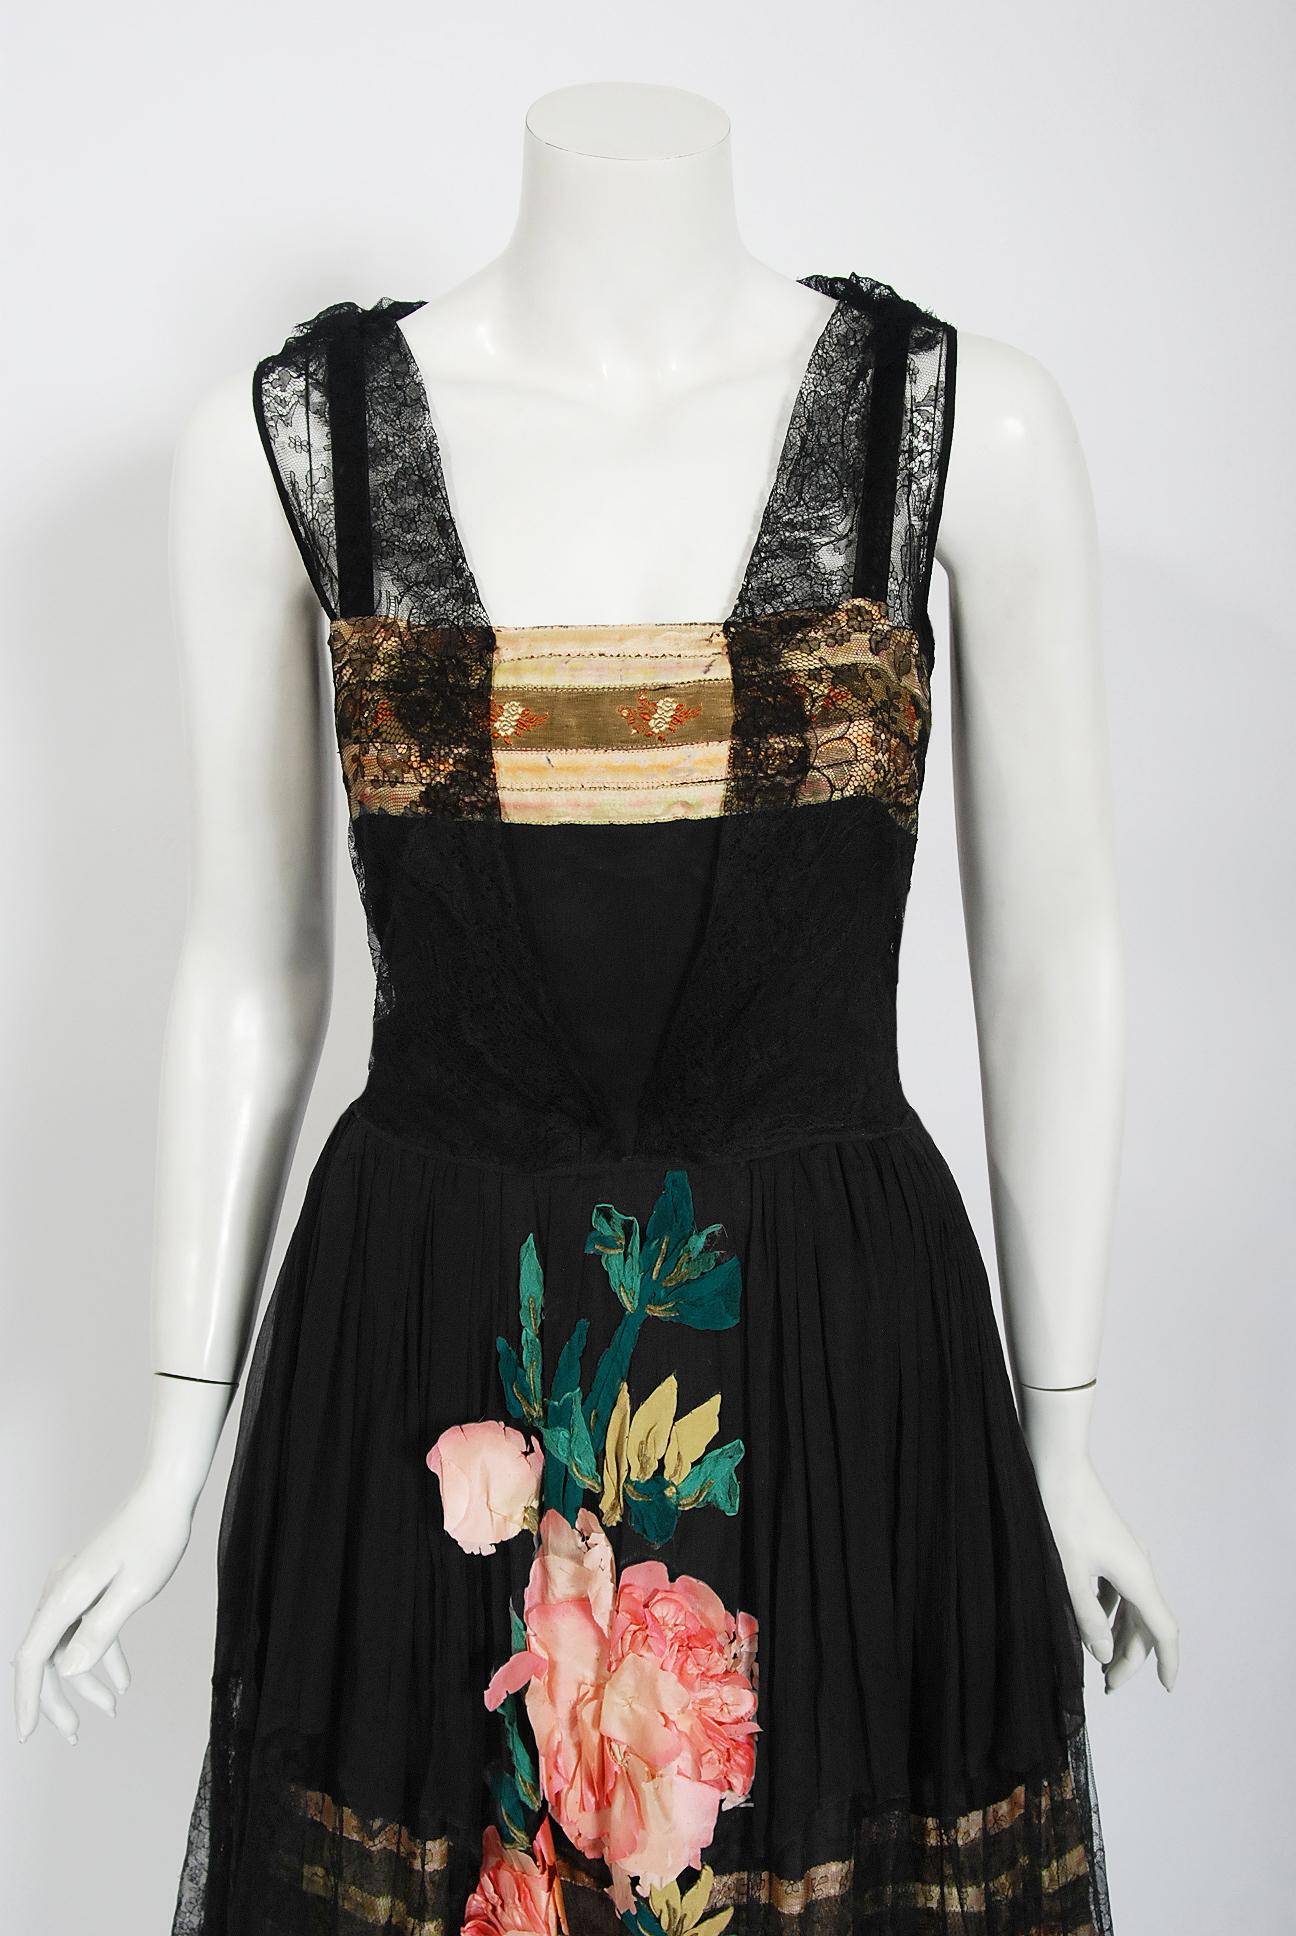 Gorgeous 1920's French dance dress in the iconic 'robe de style' silhouette made famous by Jeanne Lanvin. I wouldn't be surprised if this creation was by a famous designer, as it has all the hallmarks of a couture piece from this era. The dress is